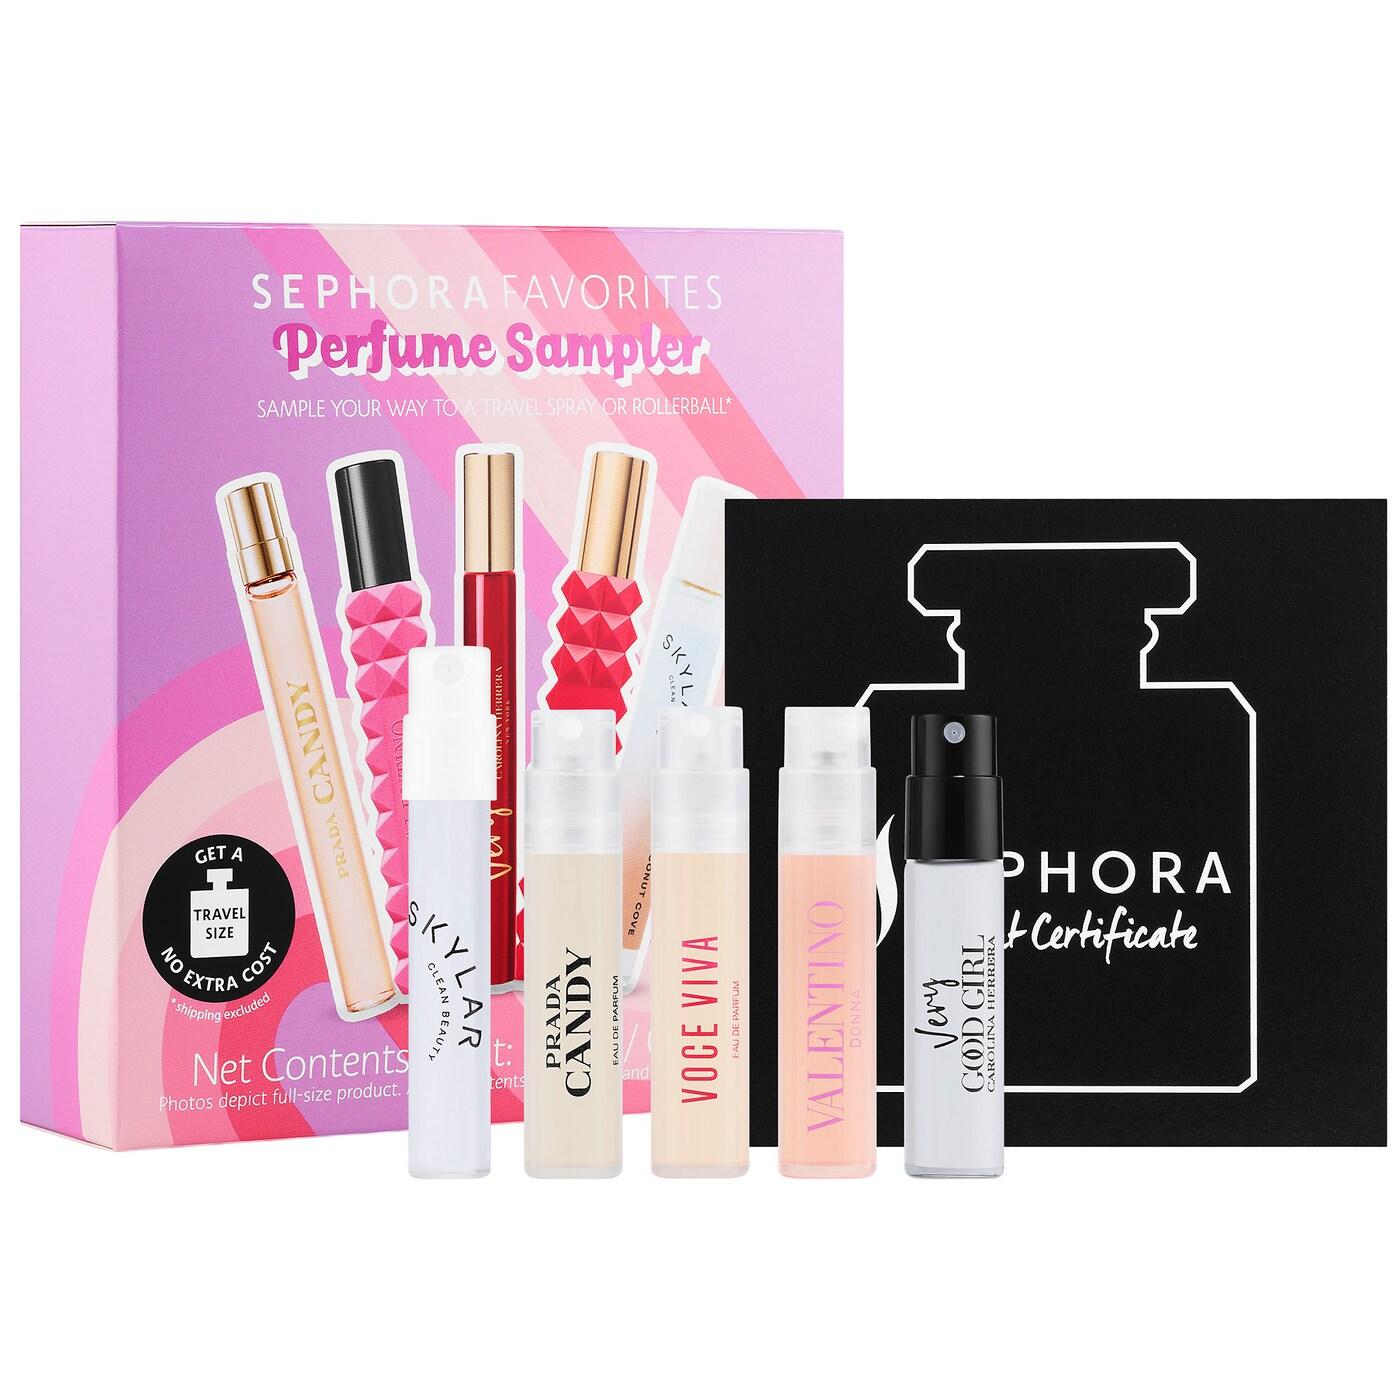 Sephora Favorites Bestsellers Perfume Discovery Set – On Sale Now!